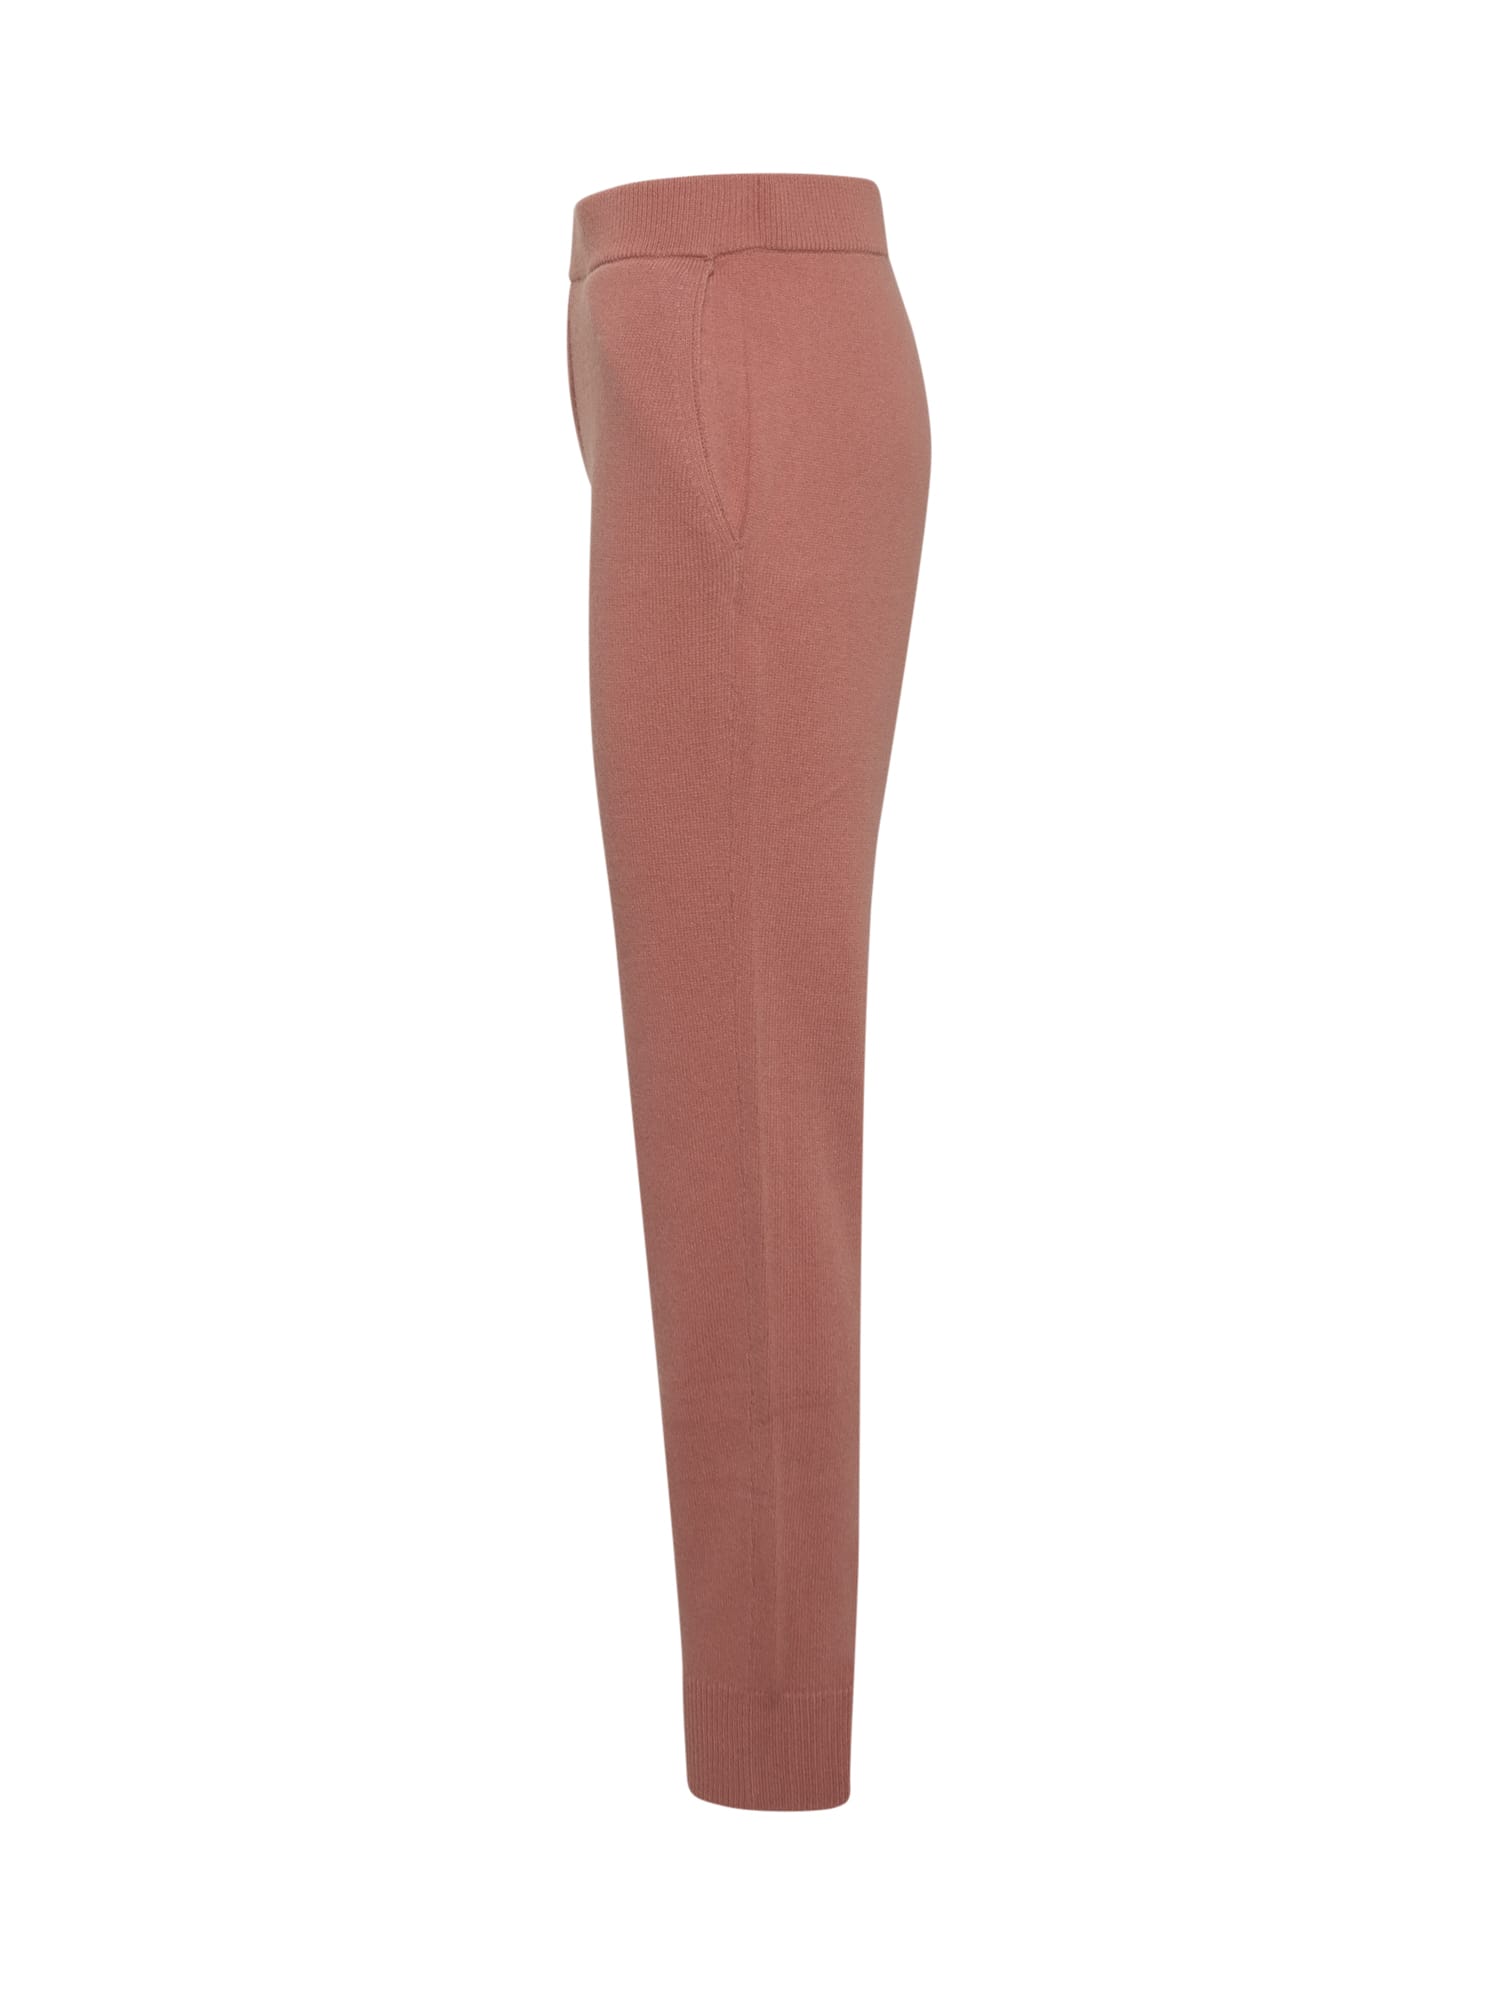 Shop Dsquared2 One Life One Planet Jogging Pants In Sienna Rose